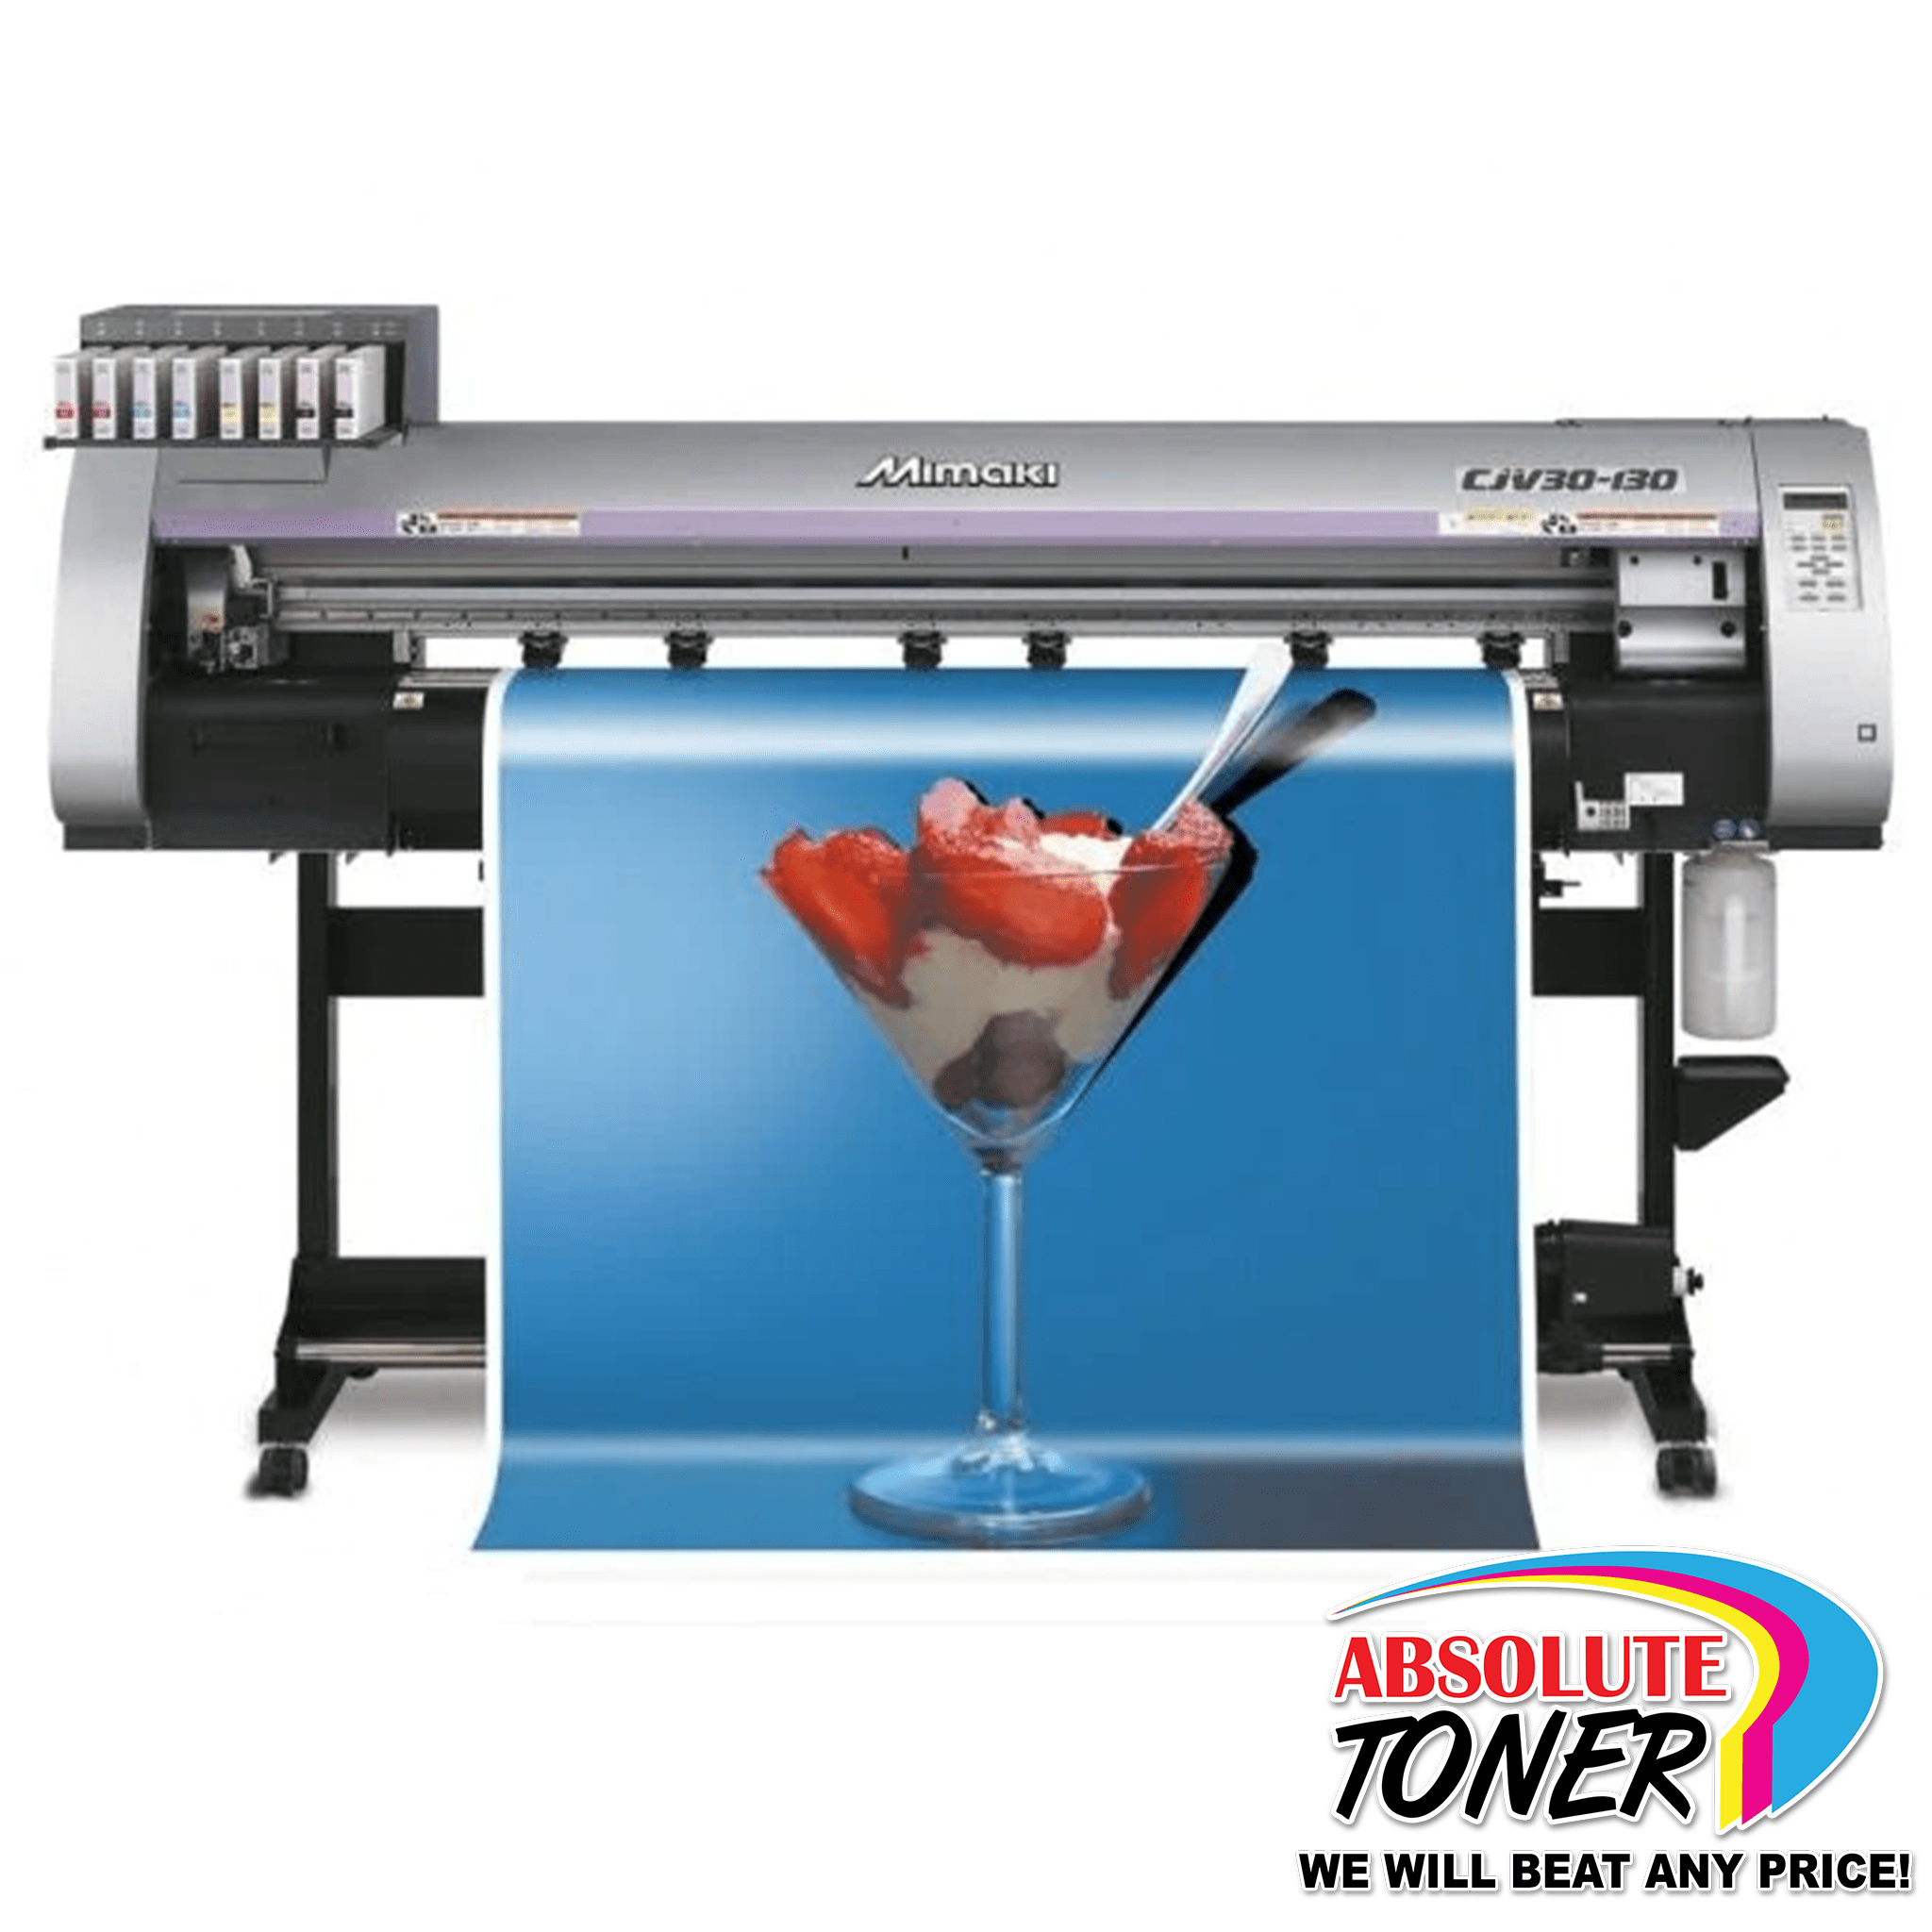 Absolute Toner $149/Month Lease MIMAKI Print and Die Cut with NEW HEADS CJV30-130 54 inch PRINTER/CUTTER Large Format Printers